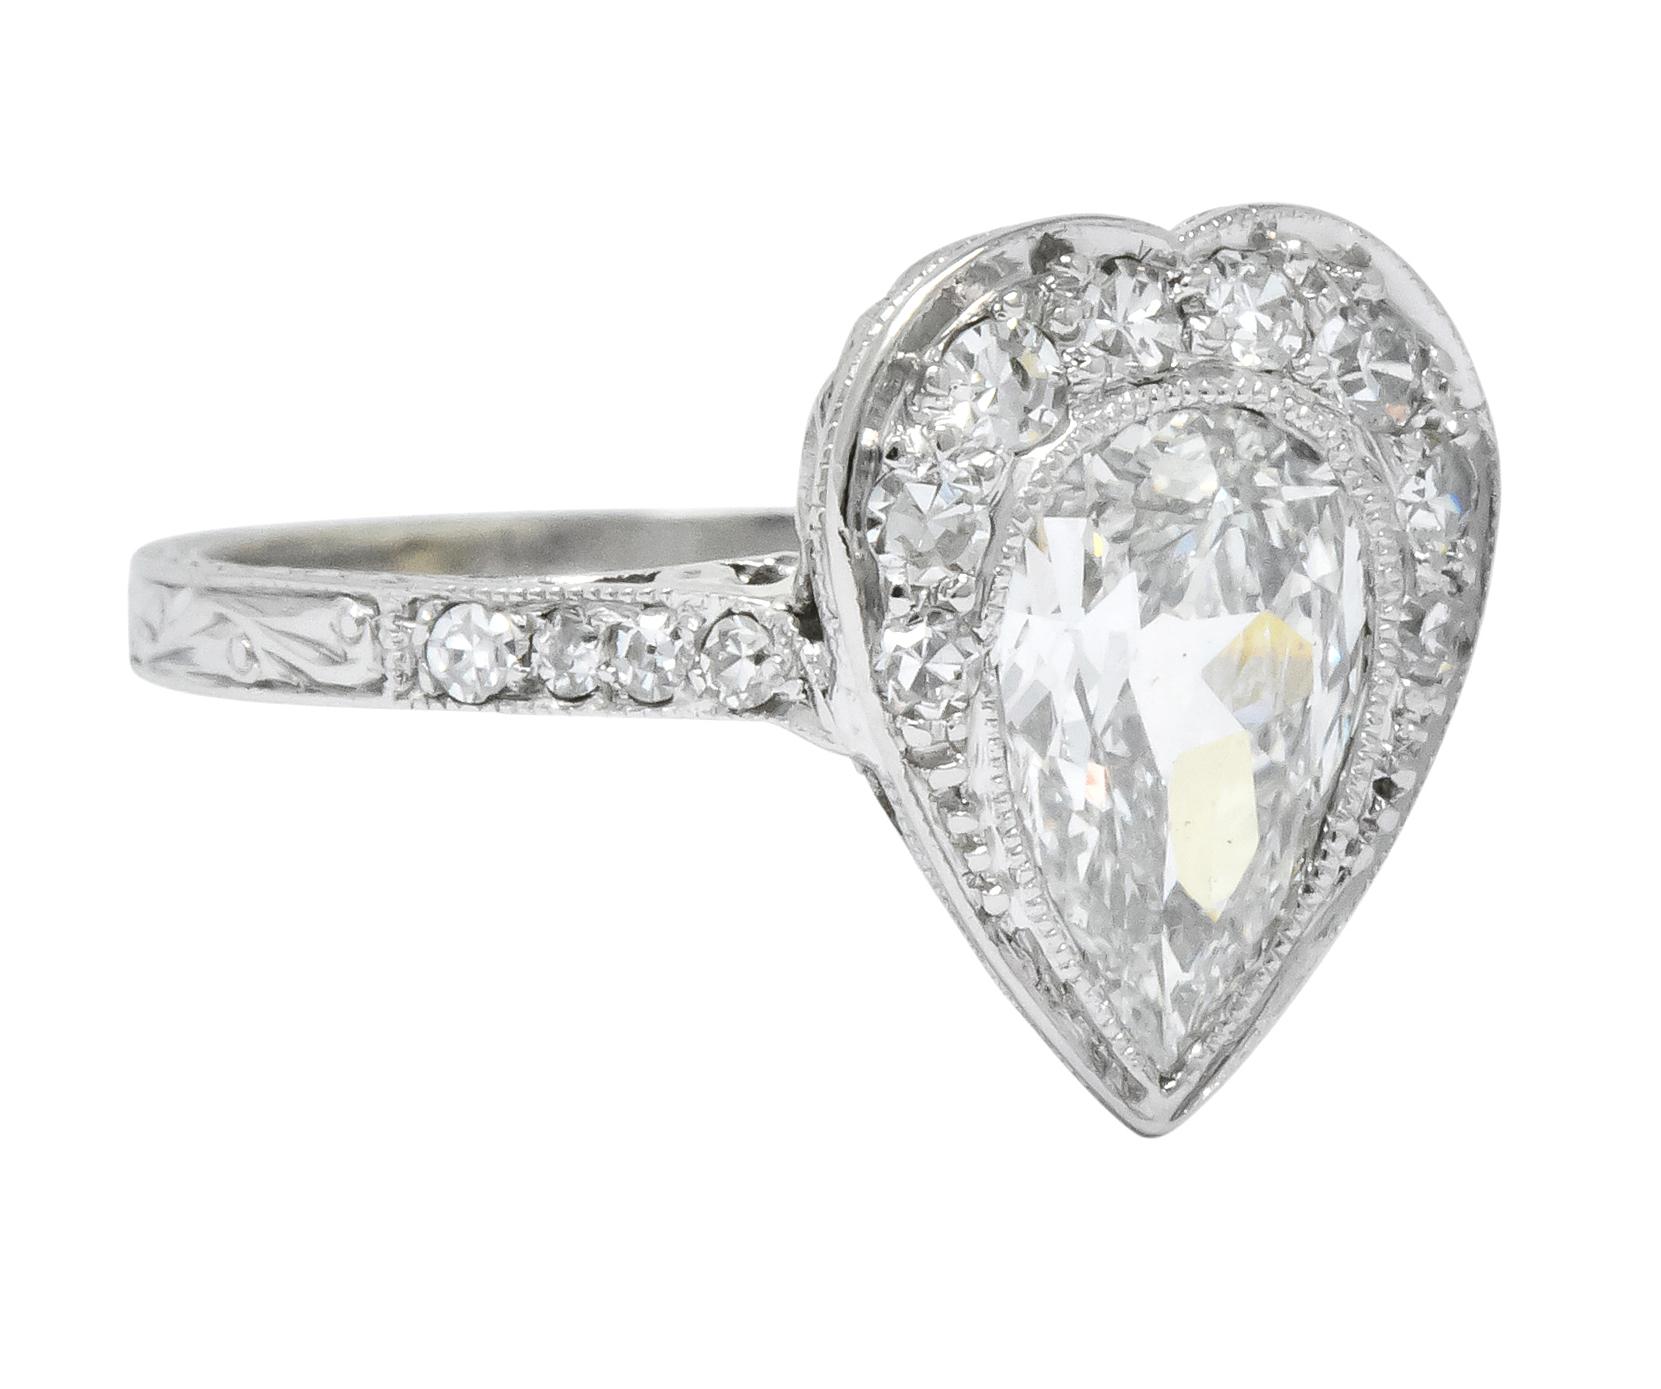 Centering a bezel set pear cut diamond weighing approximately 1.15 carats, I color and SI1 clarity

Accented with bead set single cut diamonds around and down the shank, weighing approximately 0.30 carat total, G/H color and VS to SI